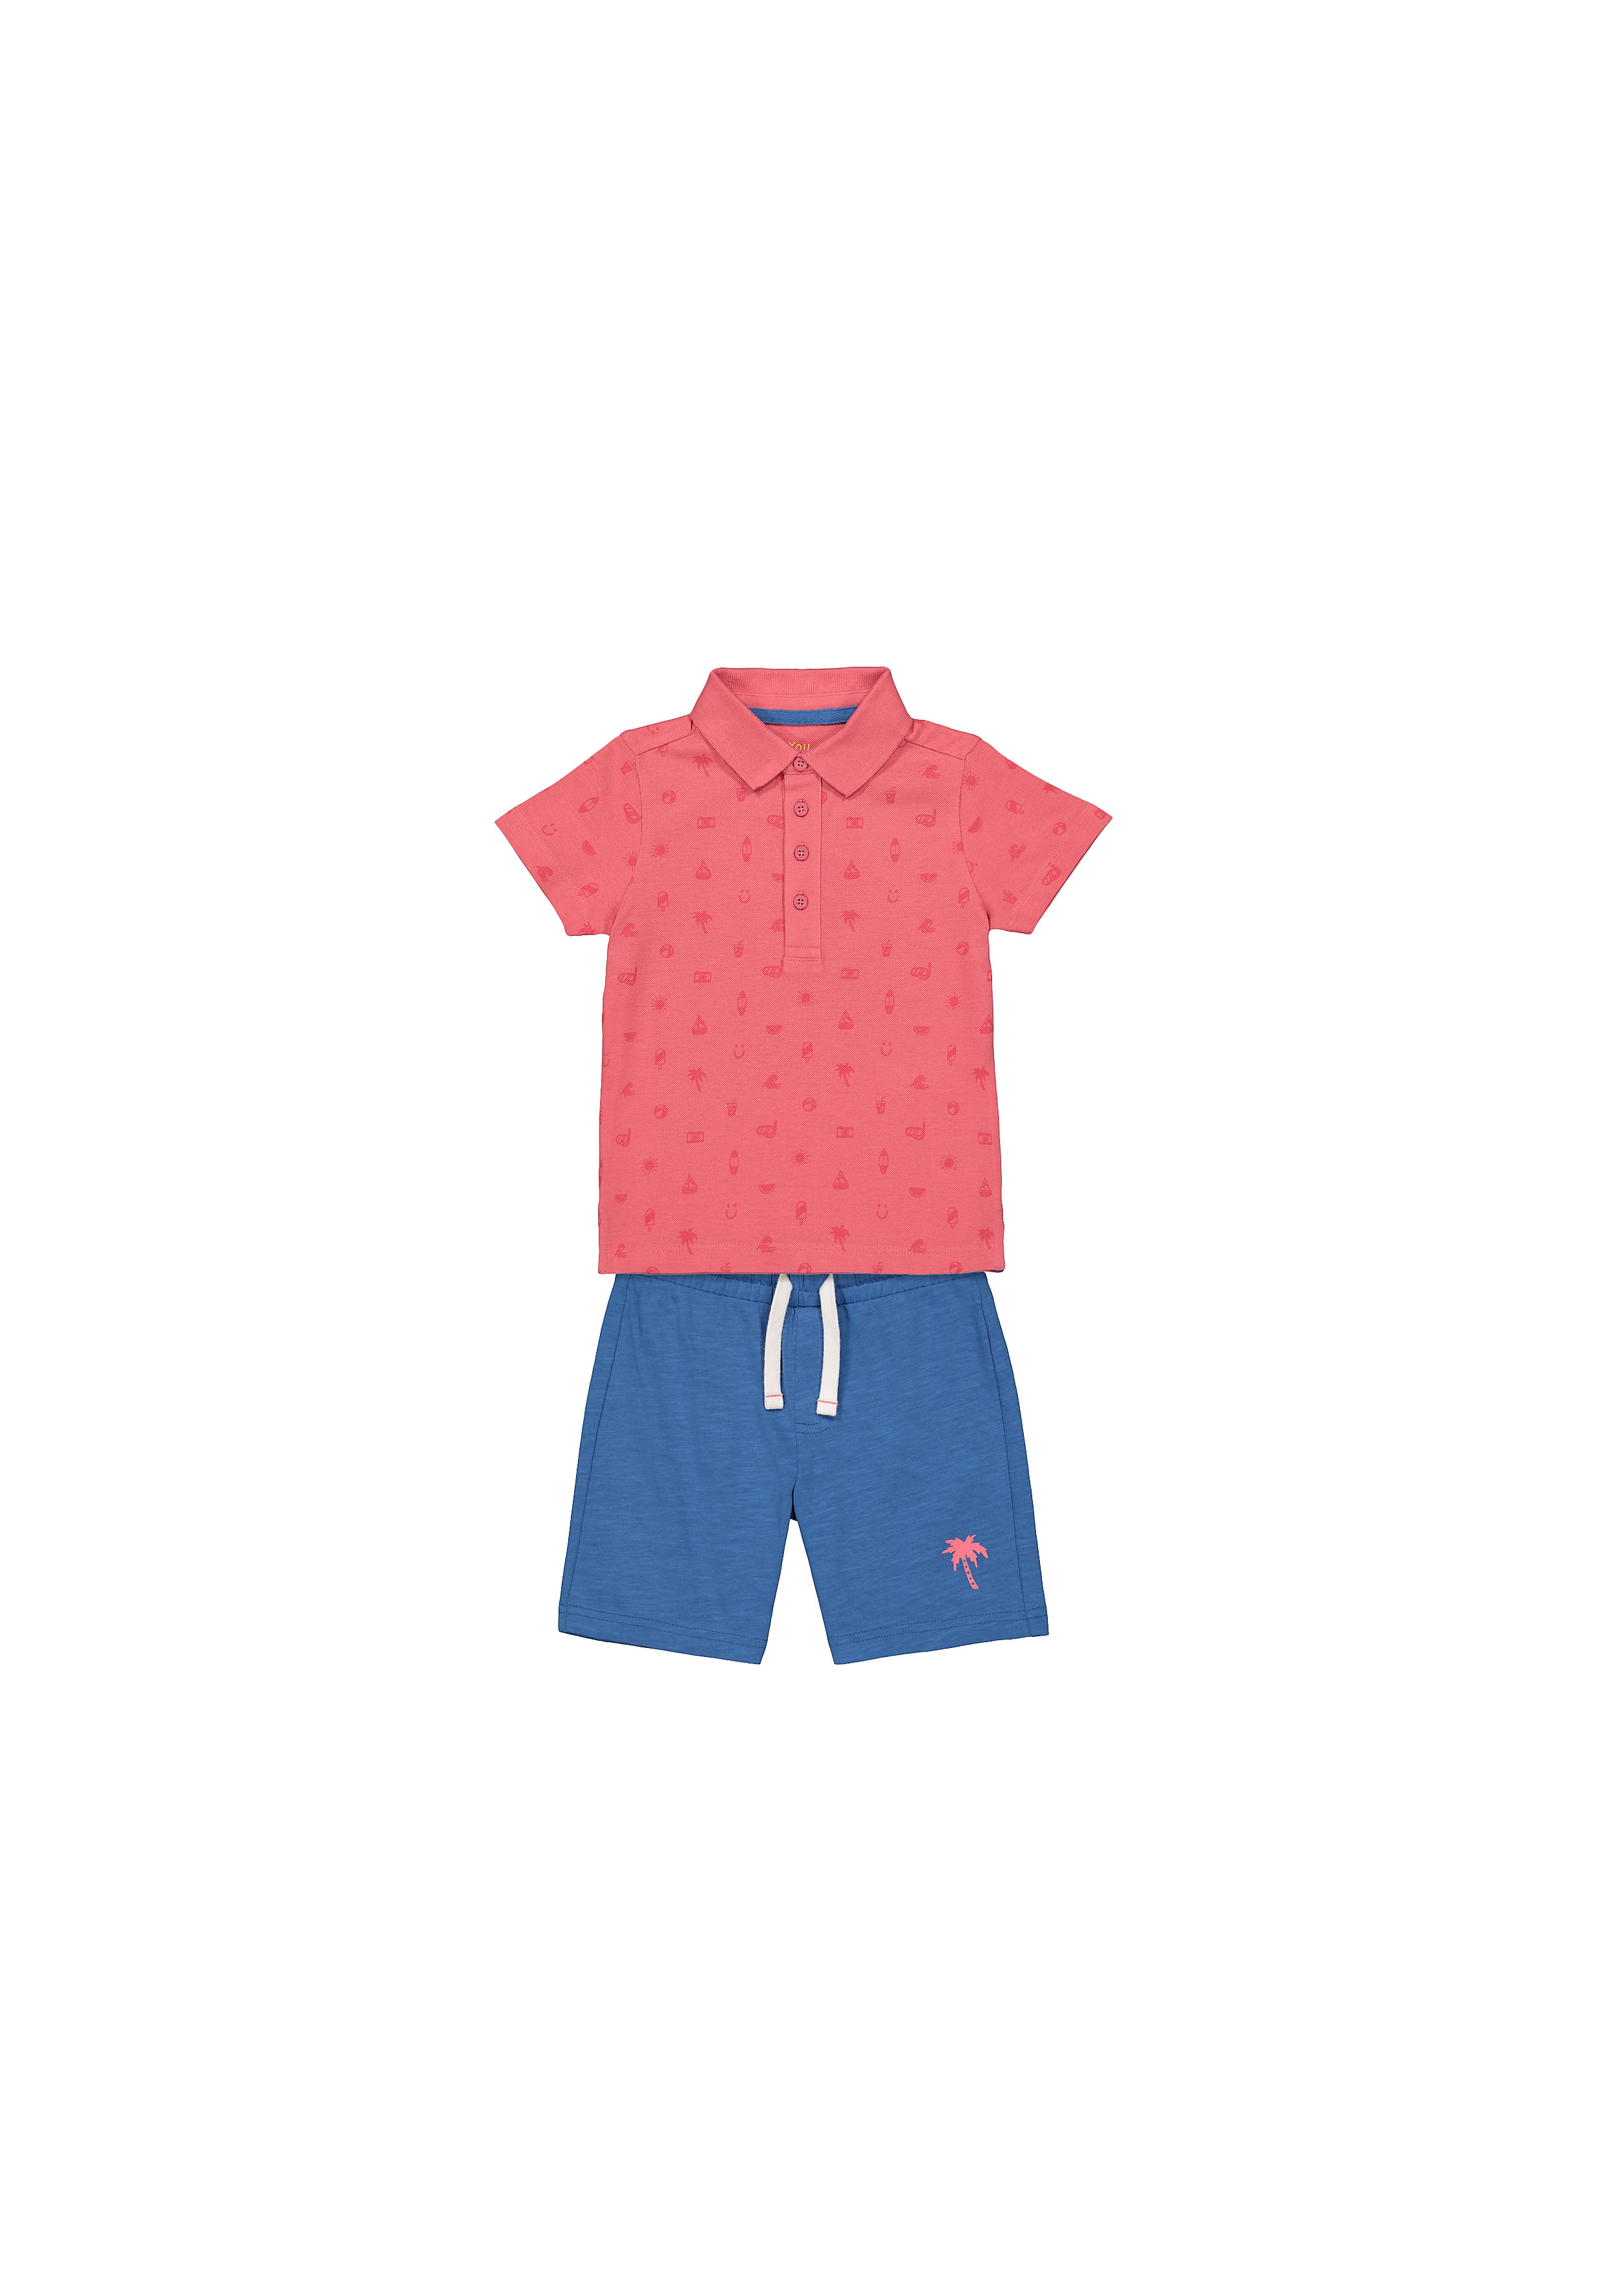 Mothercare | Boys Half Sleeves Shorts Sets  - Pack Of 2 - Multicolor